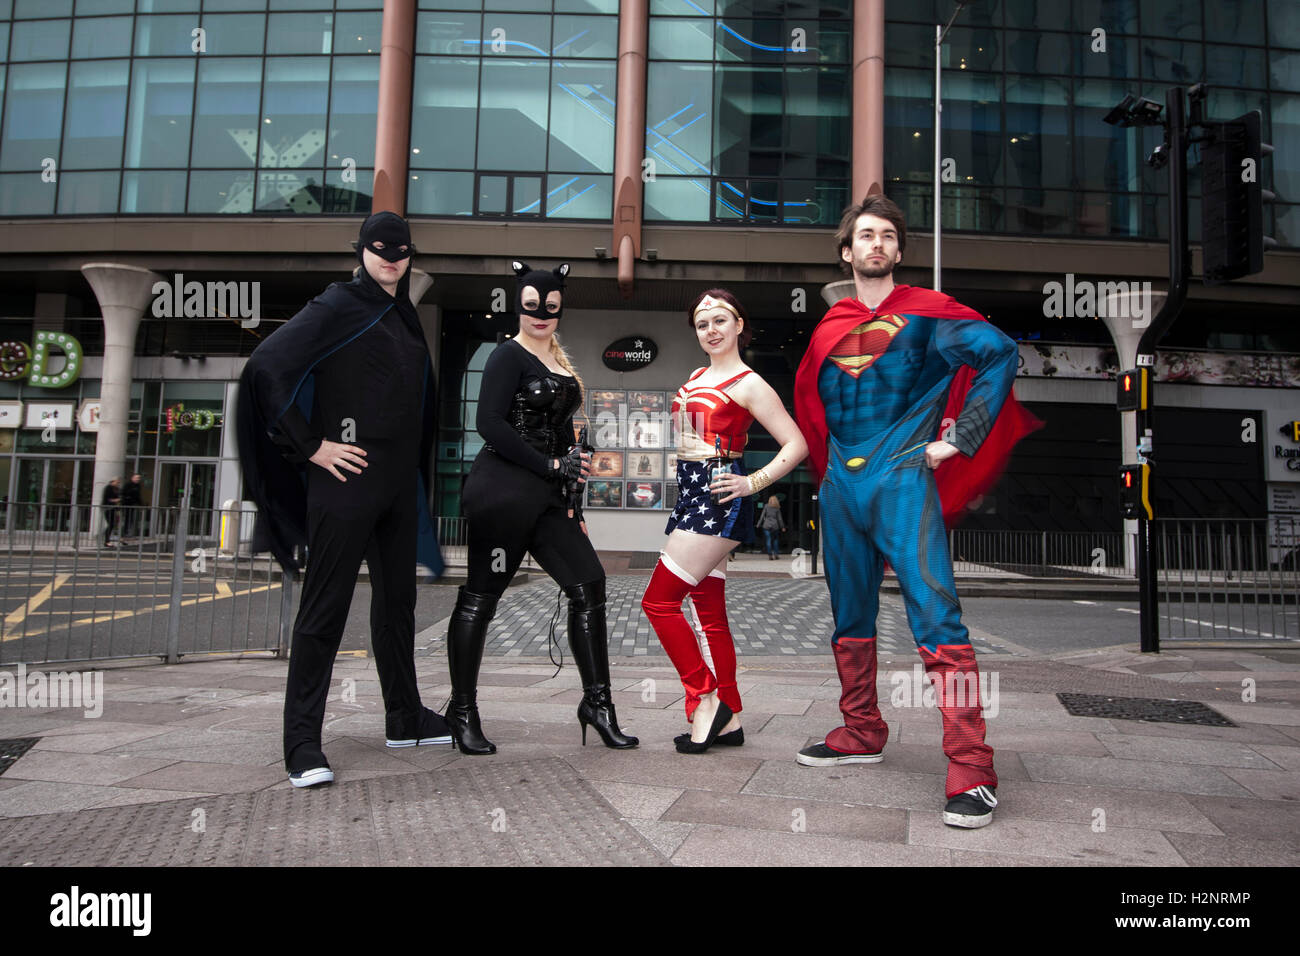 Team members of Cineworld dressed up to promote Batman V Superman opening weekend. Stock Photo